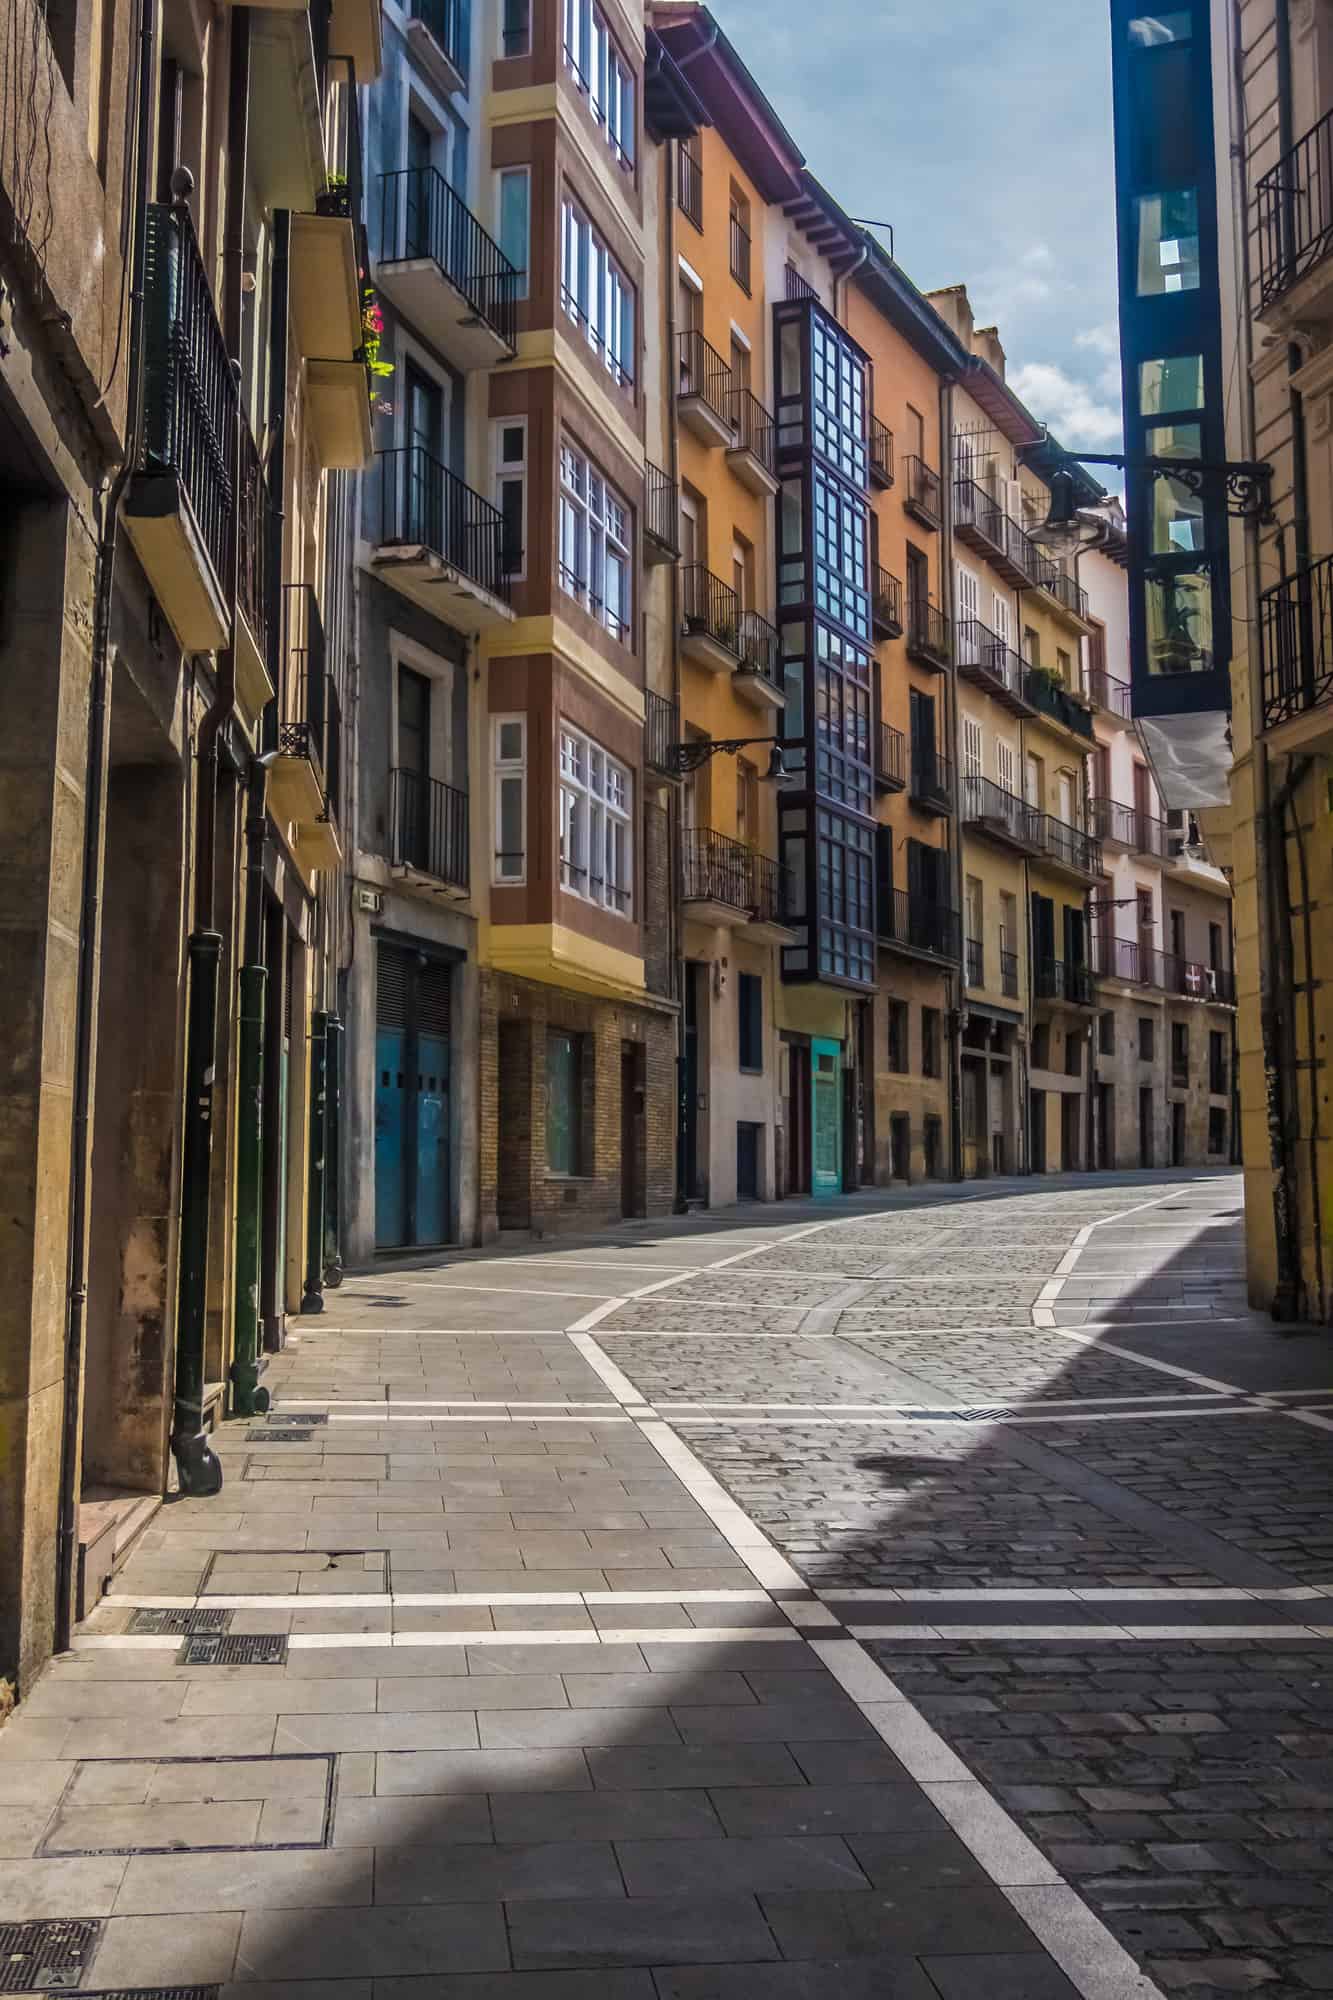 Estafeta Street, Pamplona (Iruña), the historical capitalof Navarre, Spain, Famous for the running of the bulls during the San Fermin festival brought to literary renown by Ernest Hemingway's novel The Sun Also Rises.